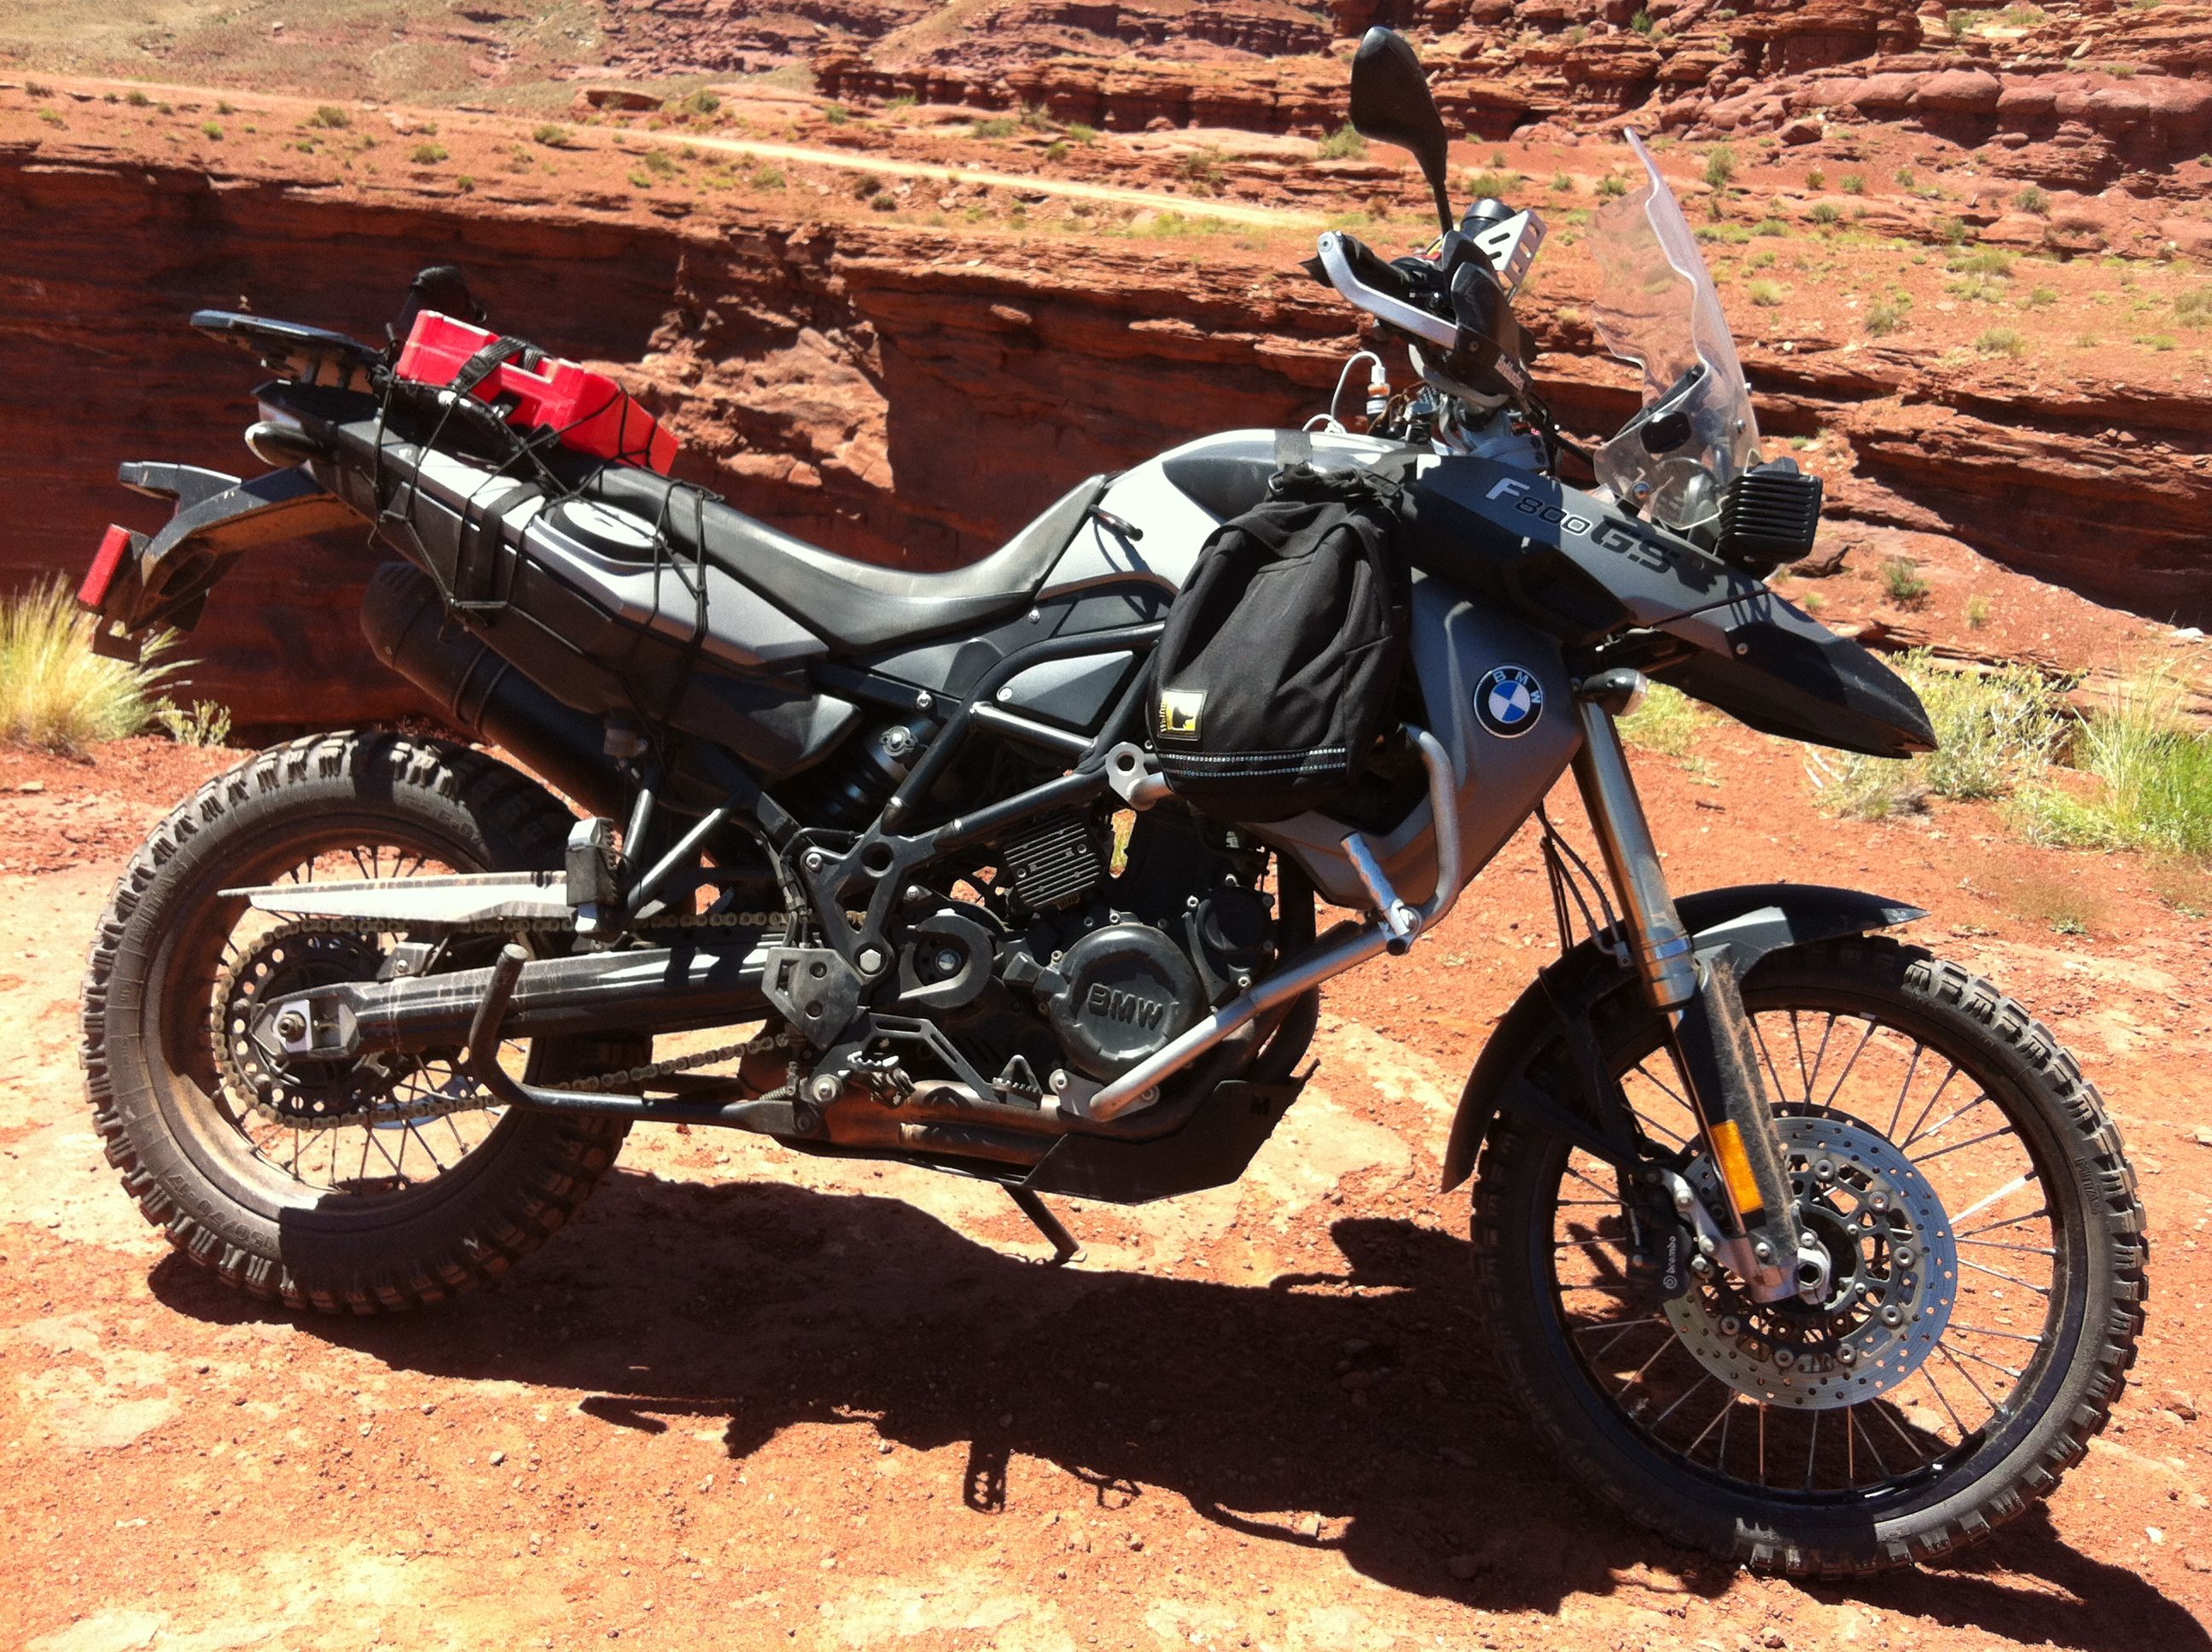 BMW F800 GS in Moab